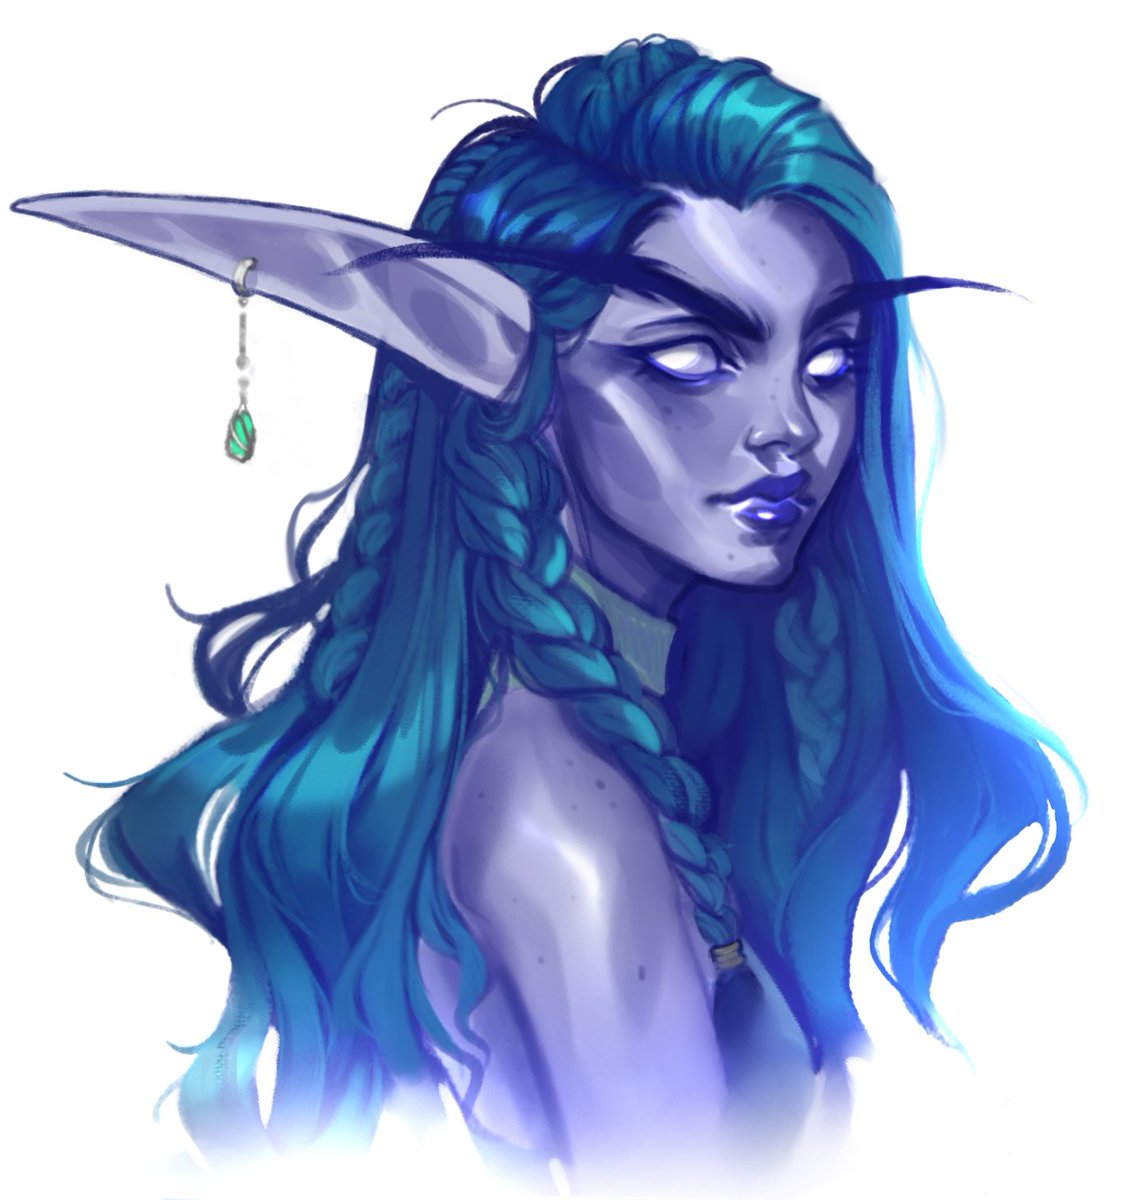 Today's warm up

#Warcraft